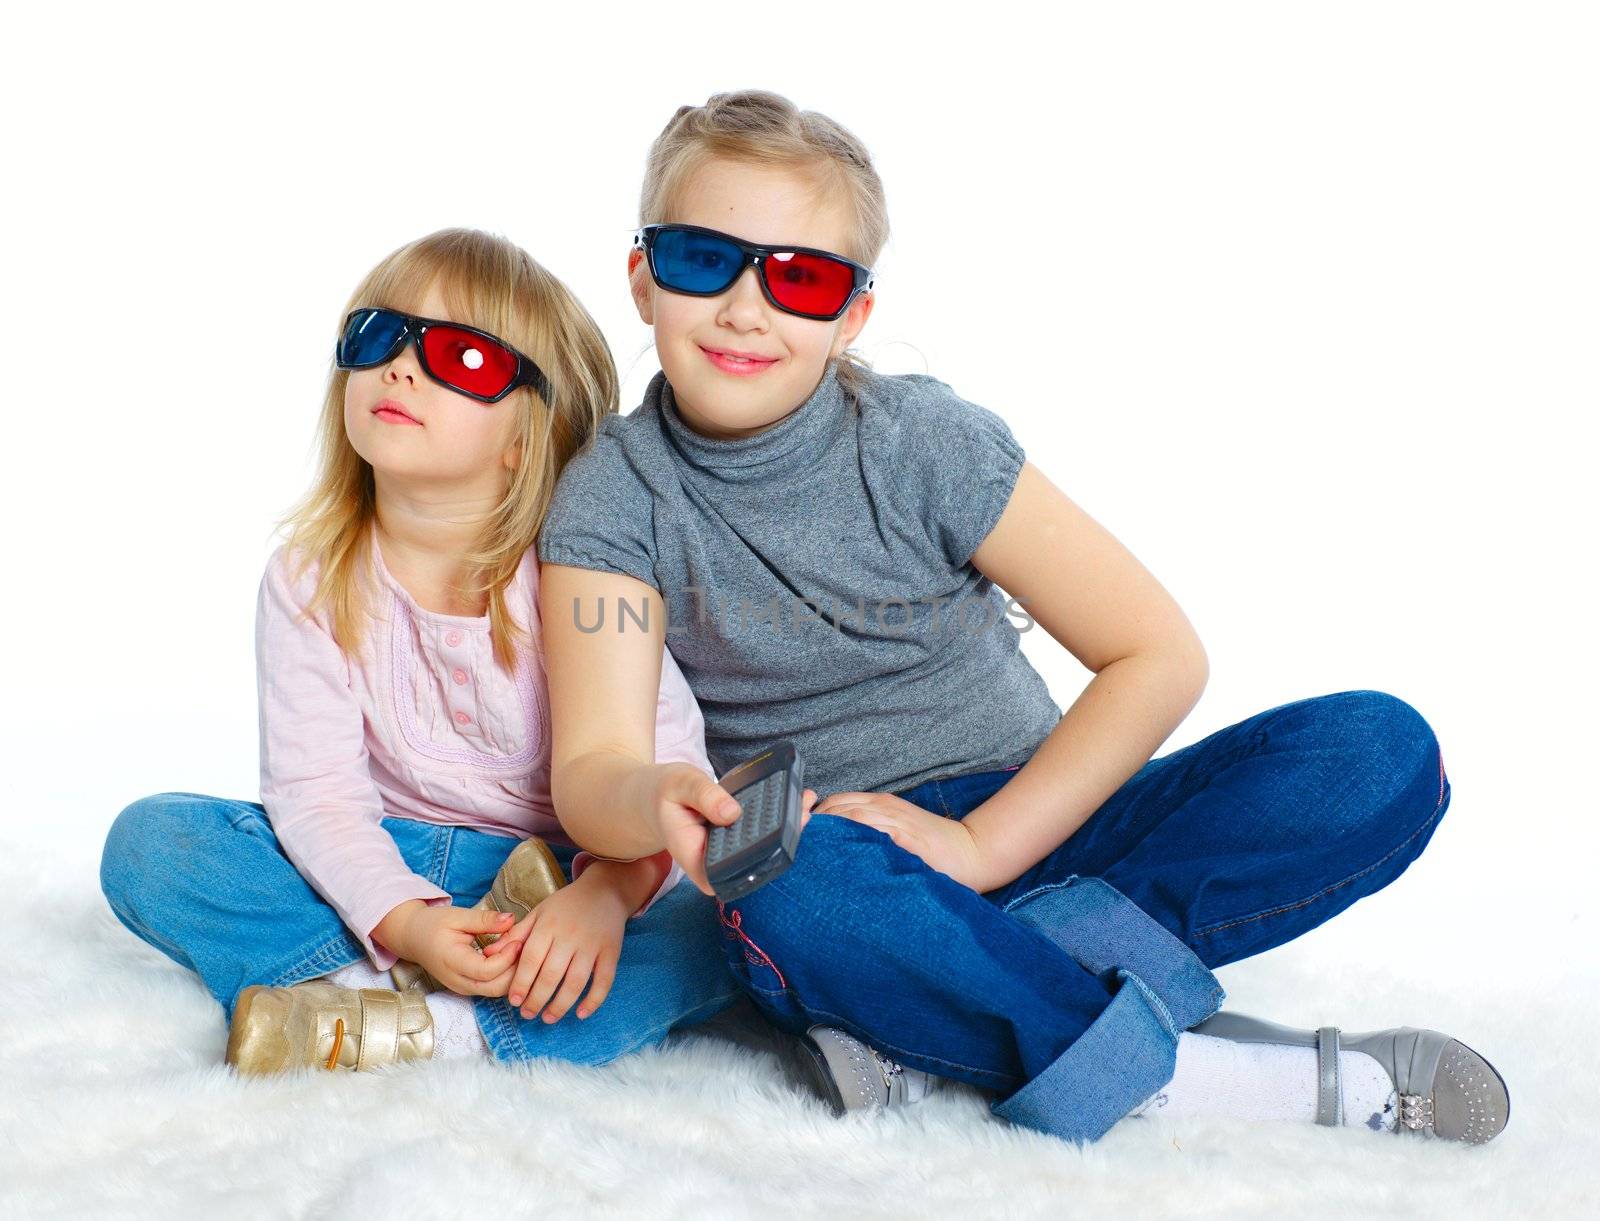 Studio shot of two girls in 3d glasses with control panel watching TV. Isolated white background